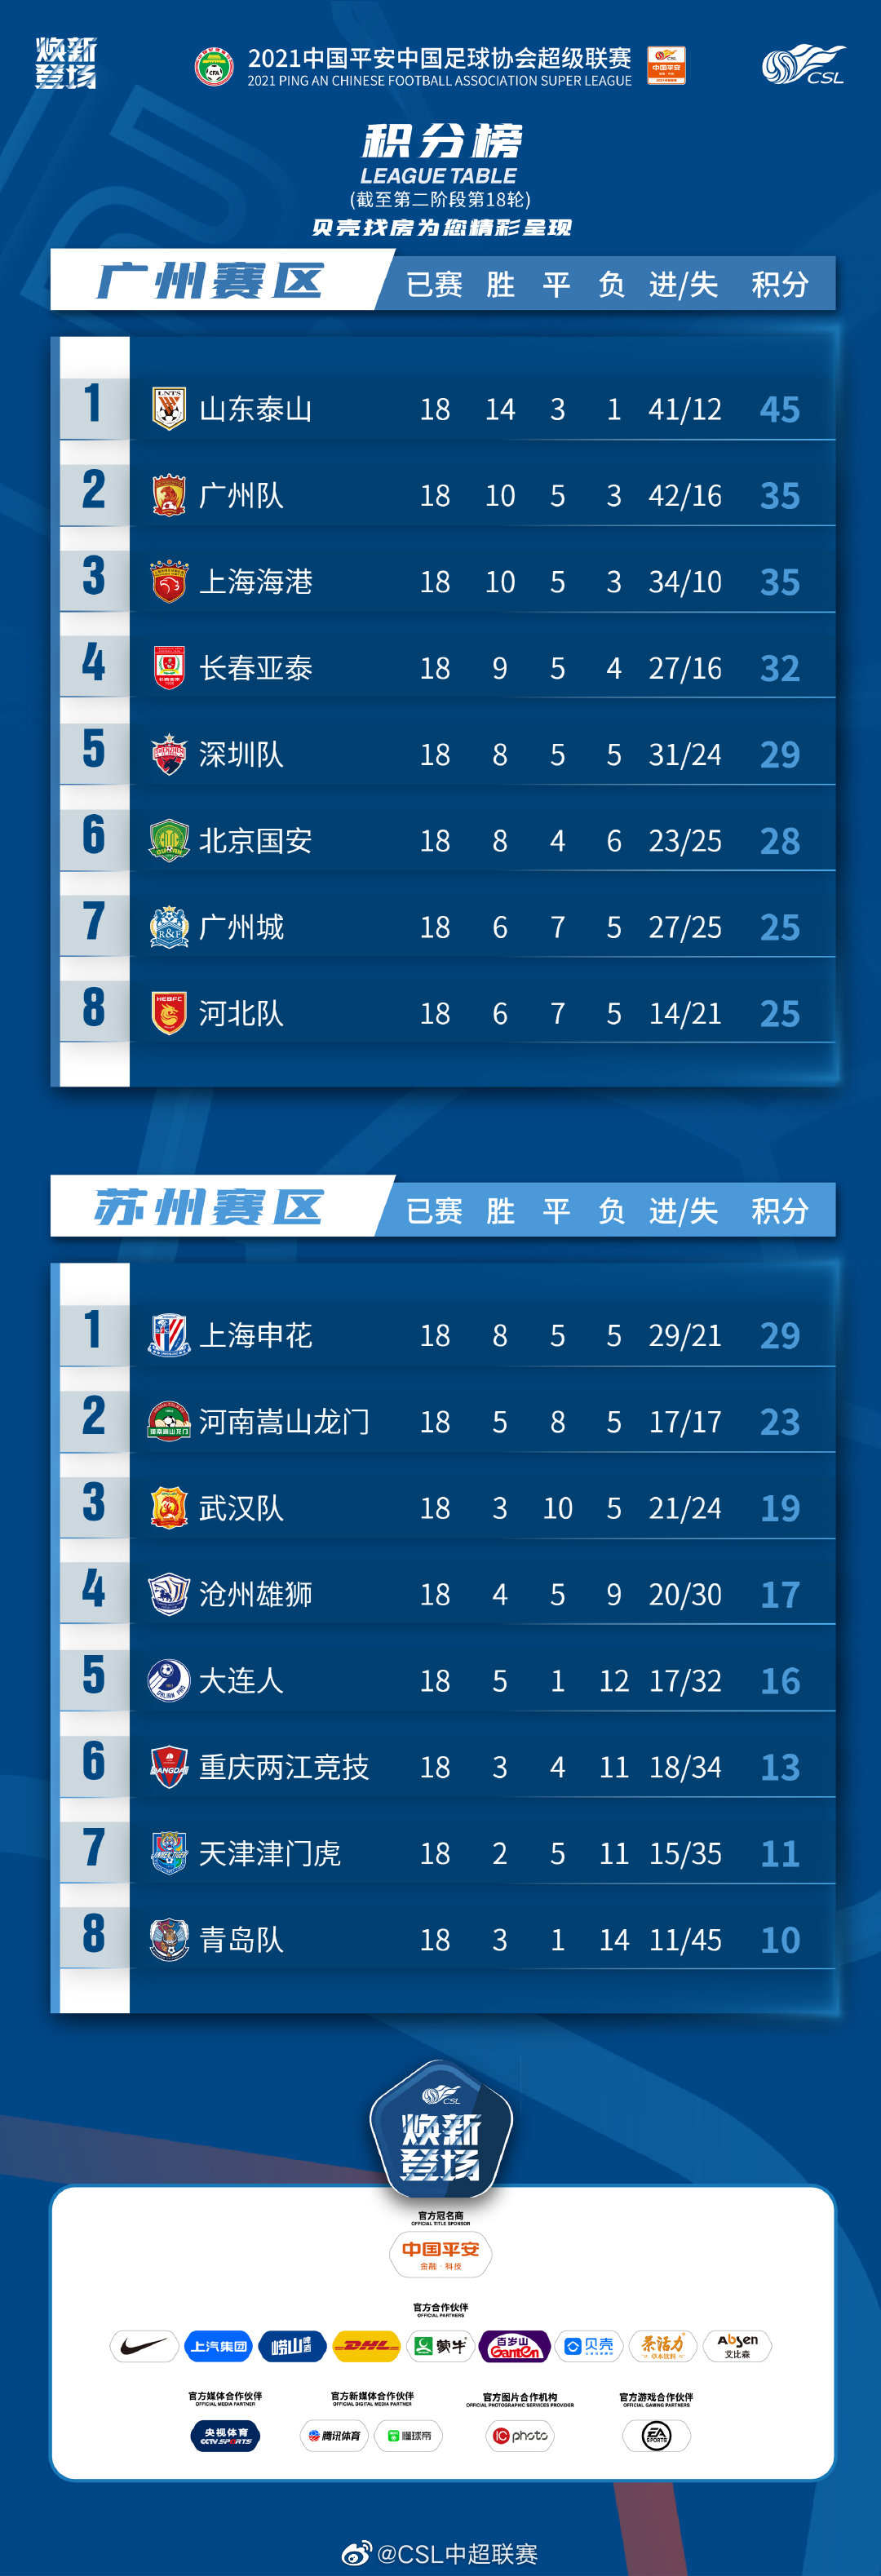 Chinese Super League standings (as of round 18).Photos/Social Media